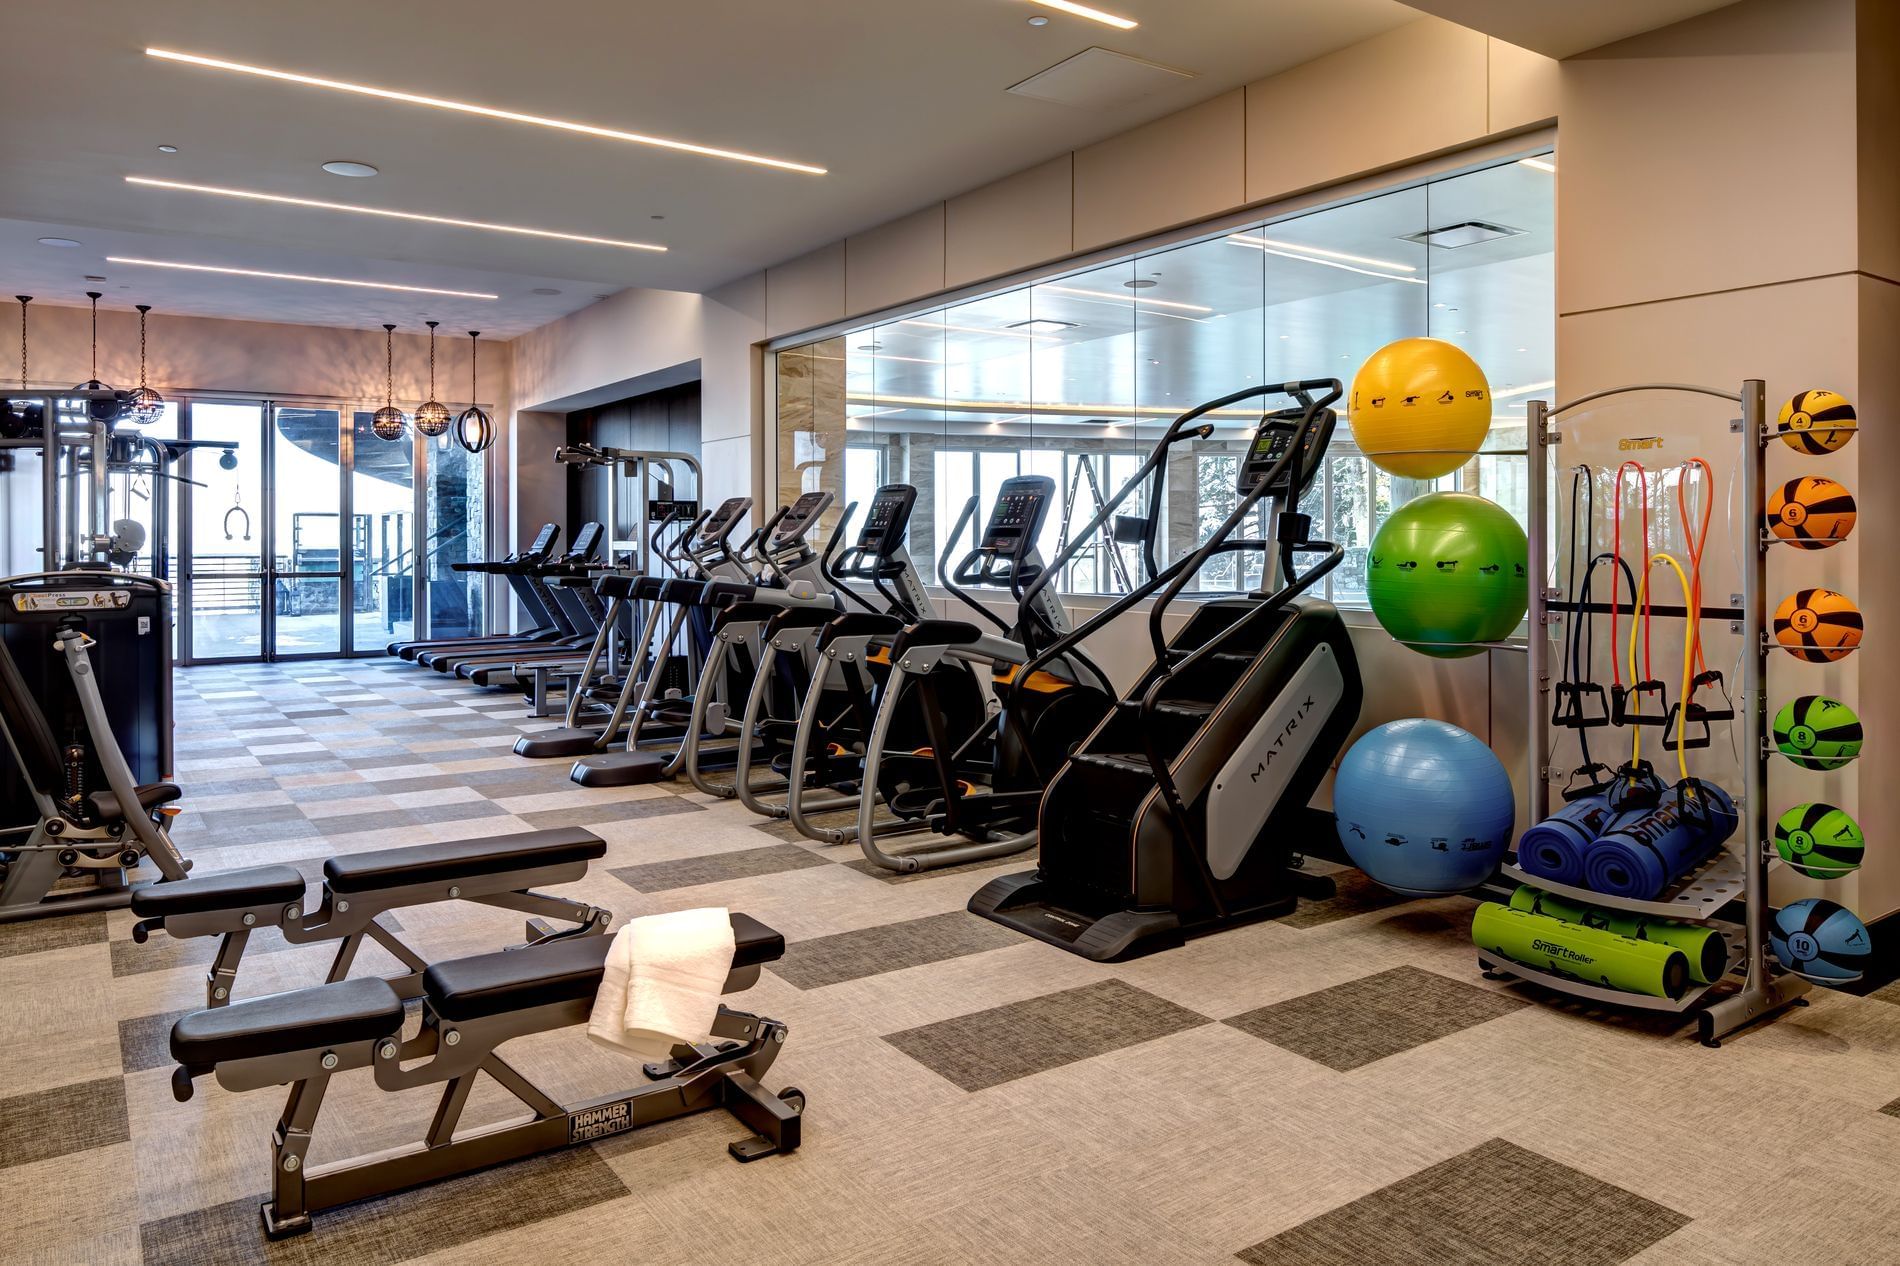 The fully equipped fitness center at Stein Eriksen Residences